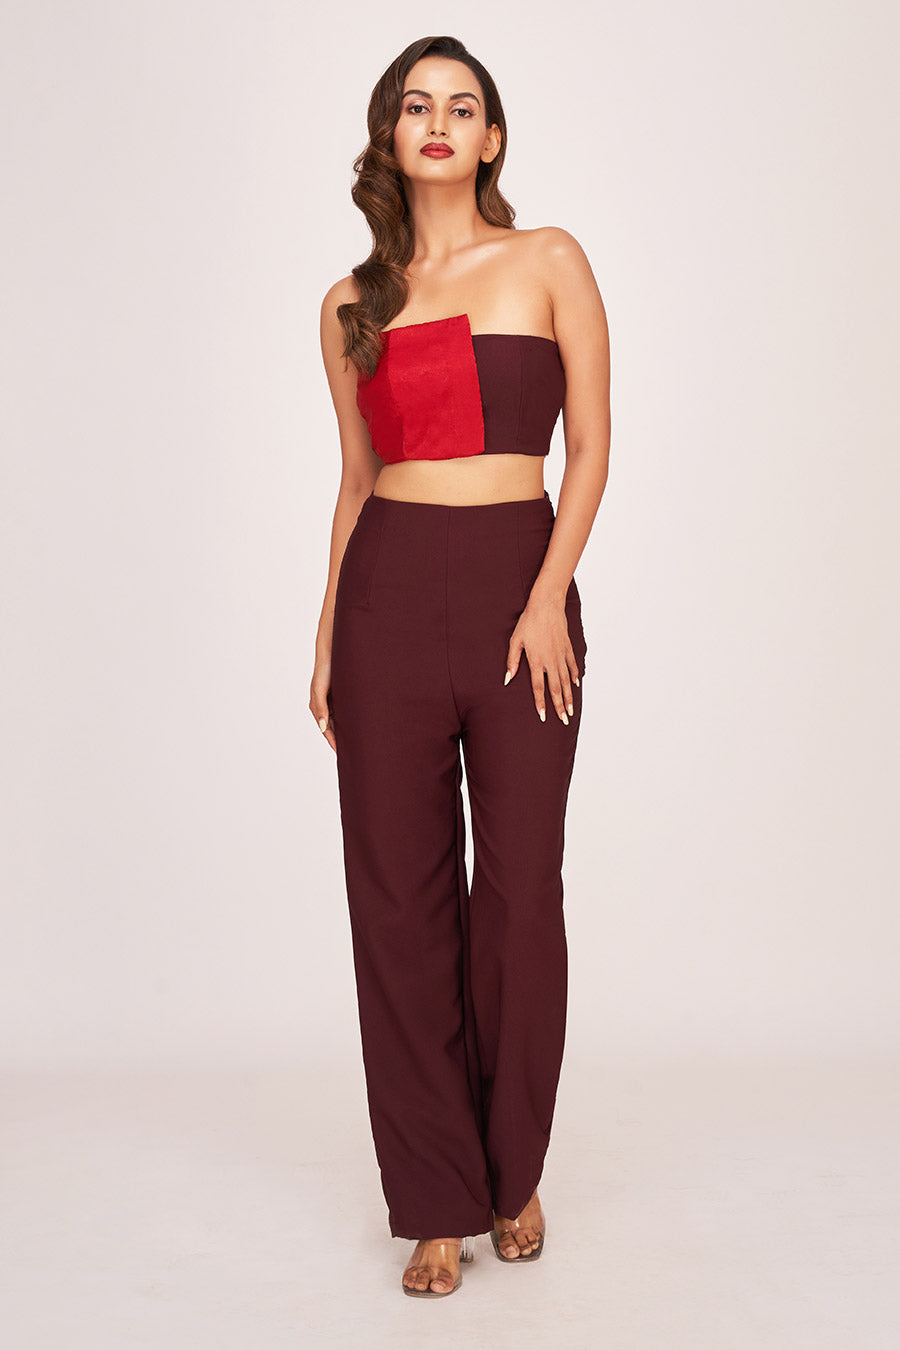 Brown & Red Crop Top with Trouser Co-Ord Set